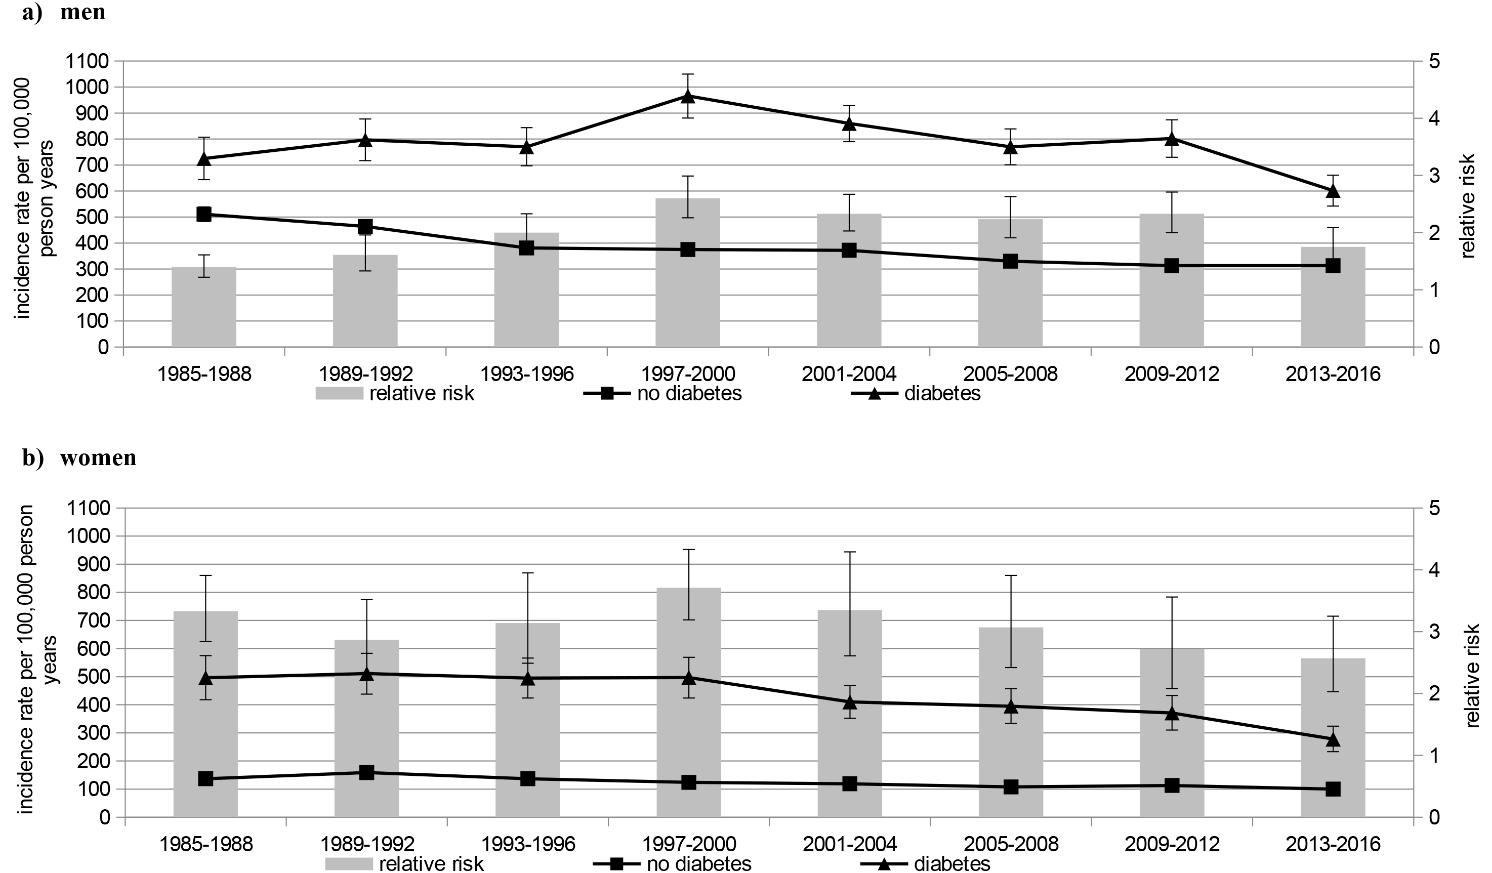 Sex-specific trends in incidence of first myocardial infarction among people with and without diabetes between 1985 and 2016 in a German region